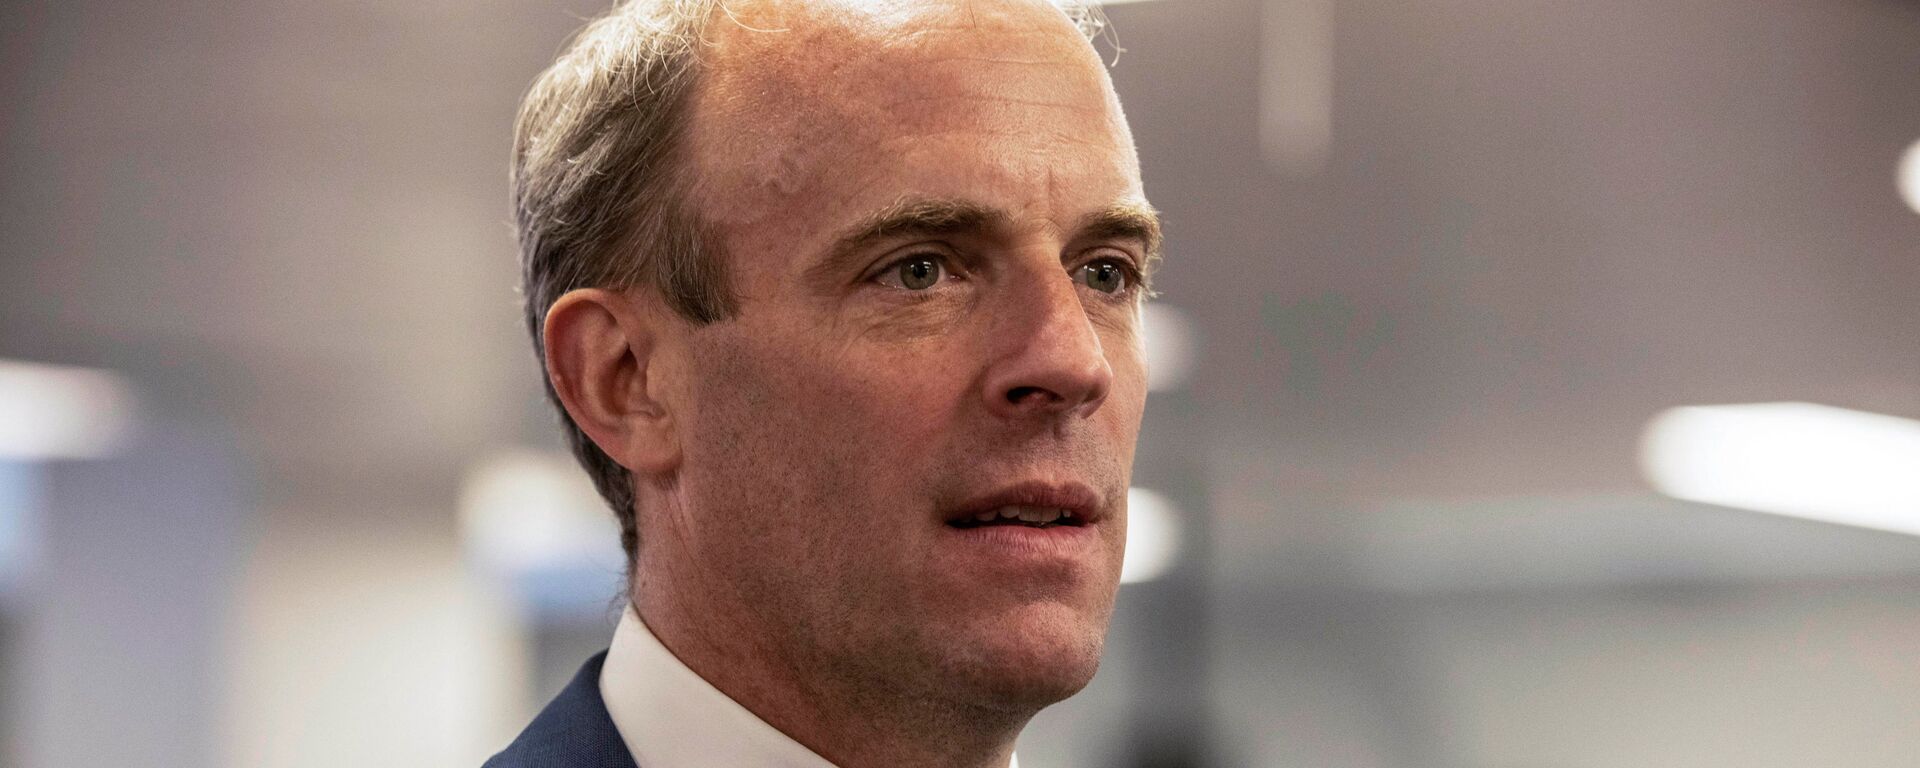 Britain's Foreign Secretary Dominic Raab looks on during a visit of Britain's Prime Minister Boris Johnson at the The Foreign, Commonwealth and Development Office (FCDO) Crisis Centre in London, Britain August 27, 2021 - Sputnik International, 1920, 31.08.2021